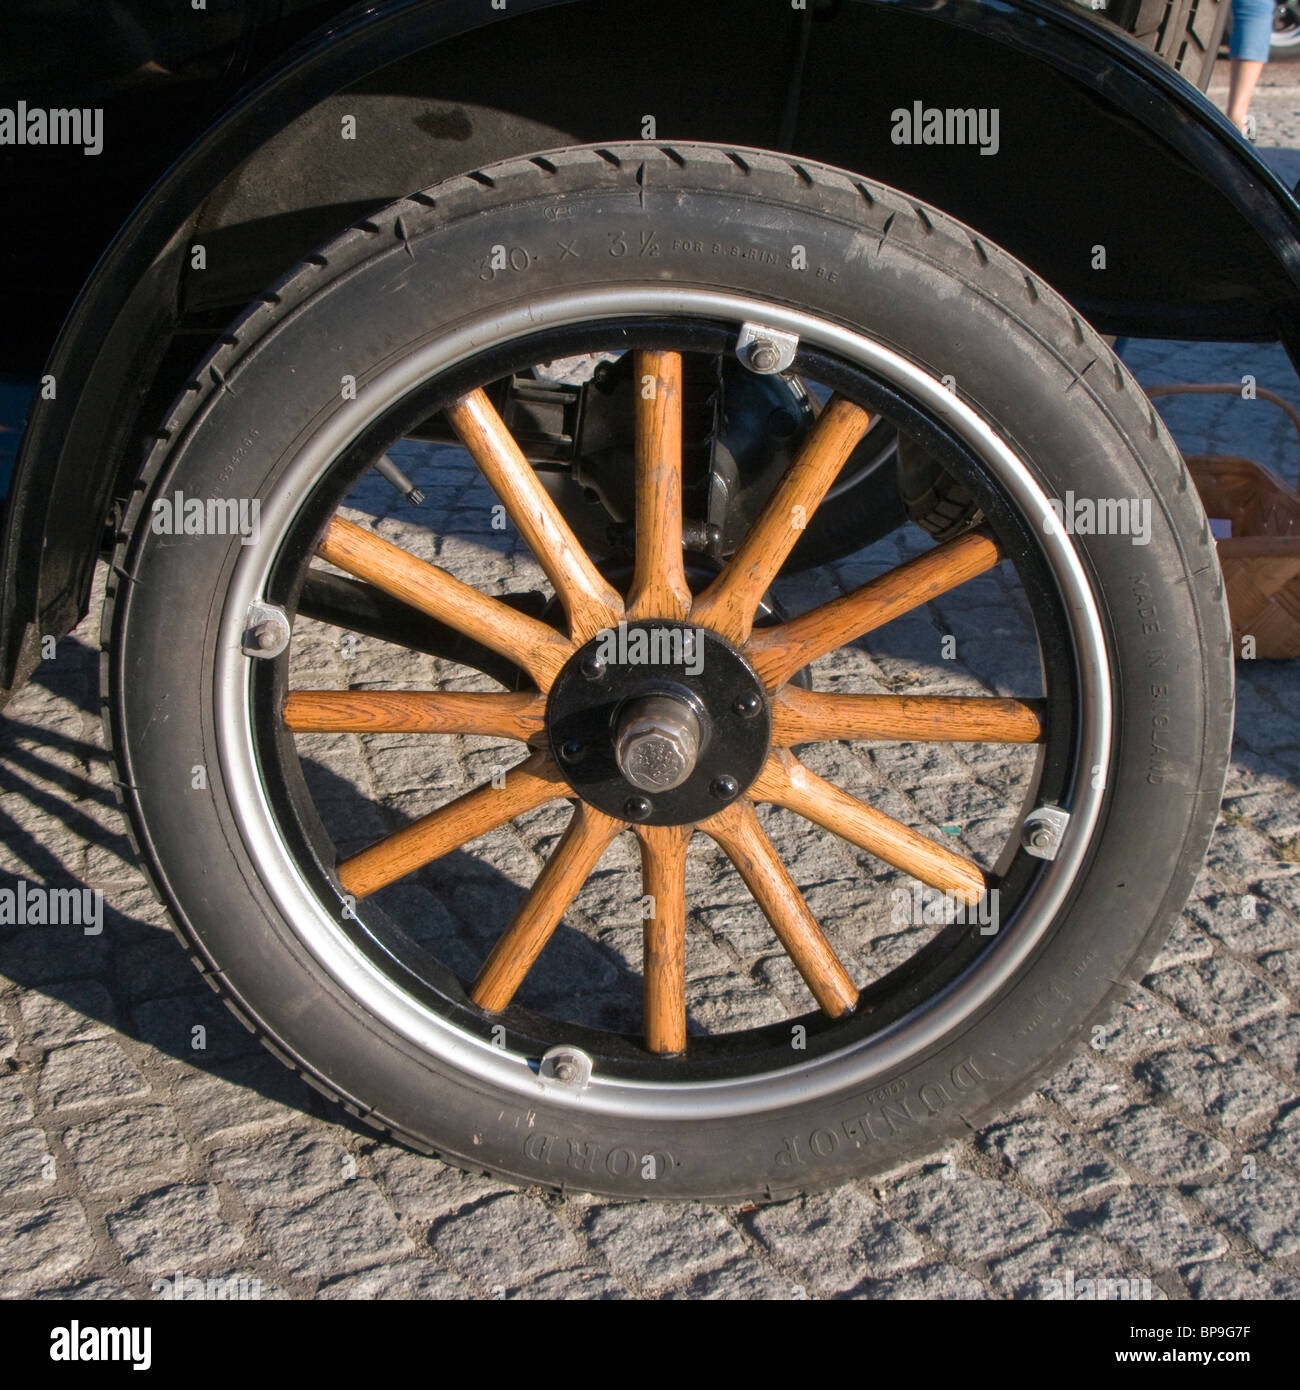 Wooden spookes on the wheel of an old car. Stock Photo